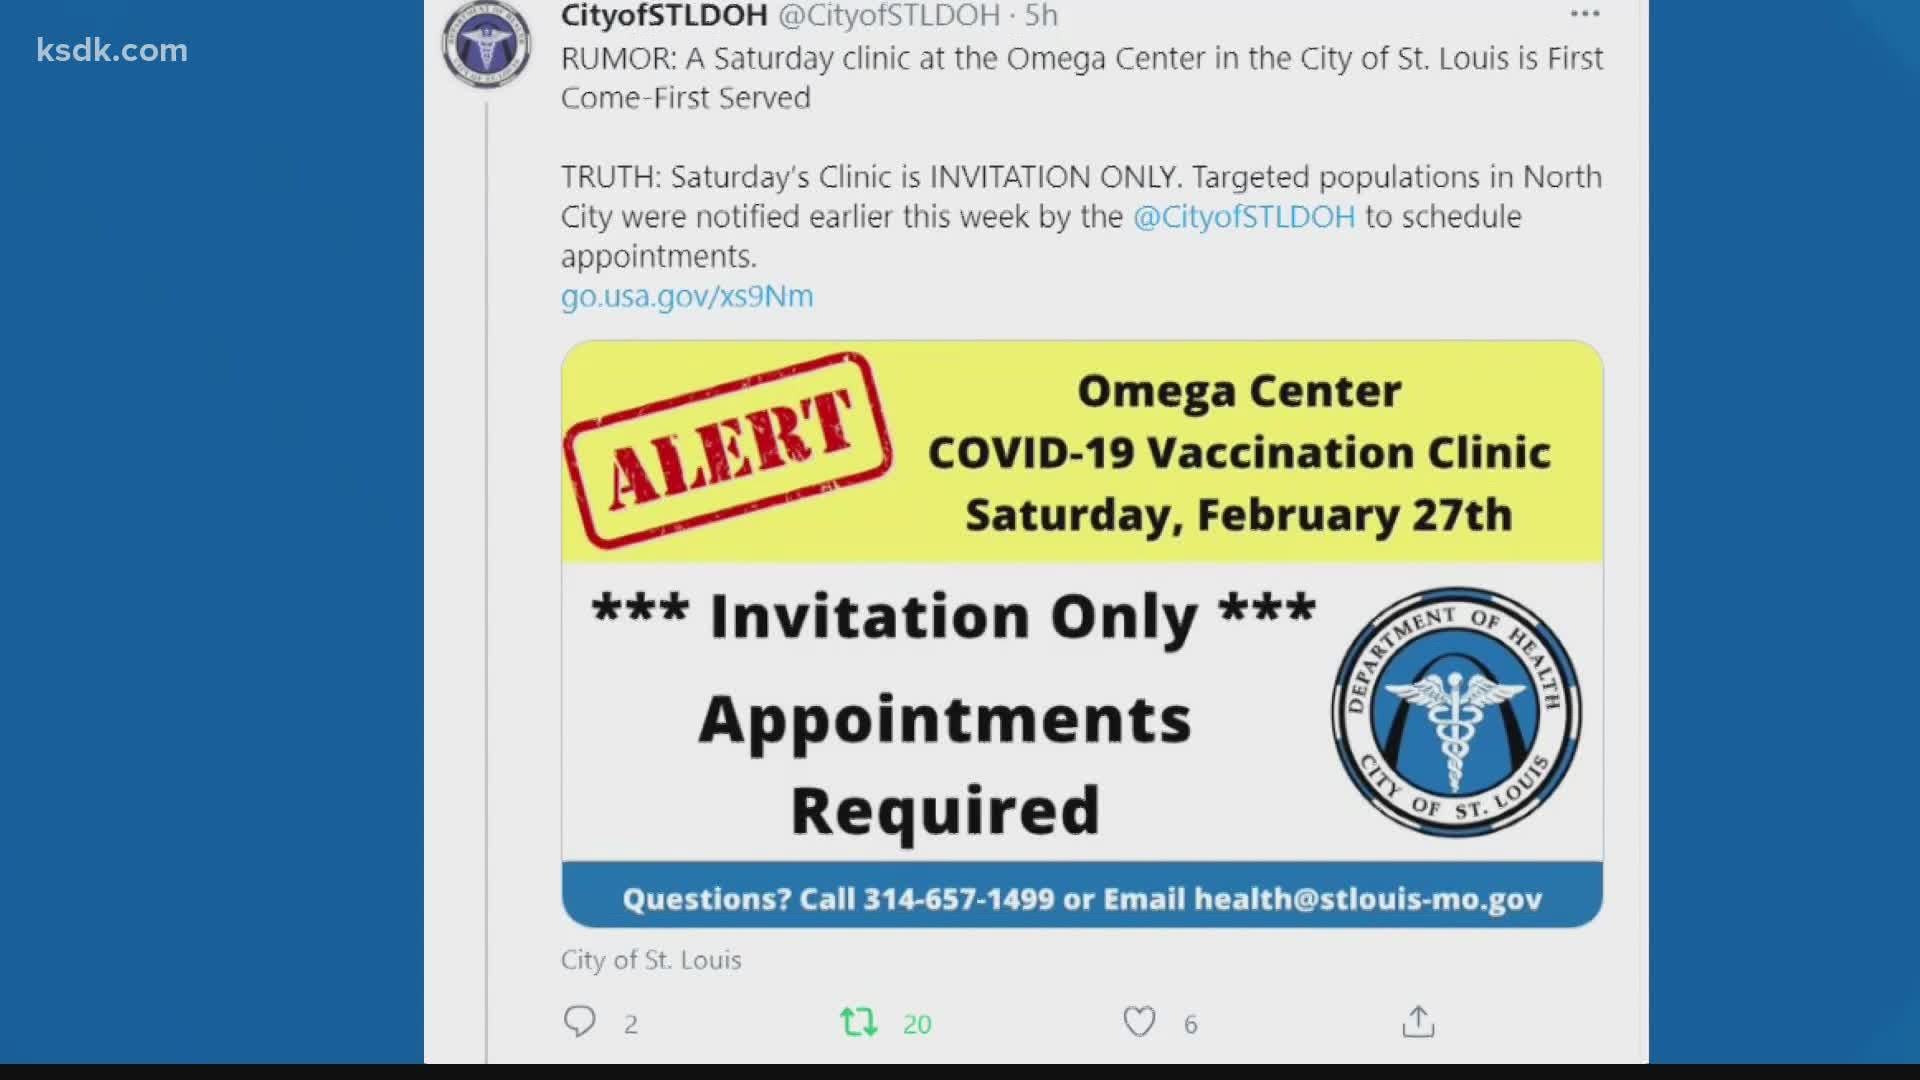 There is a vaccination clinic at the Omega Center in north city Saturday. But it is not open to the public